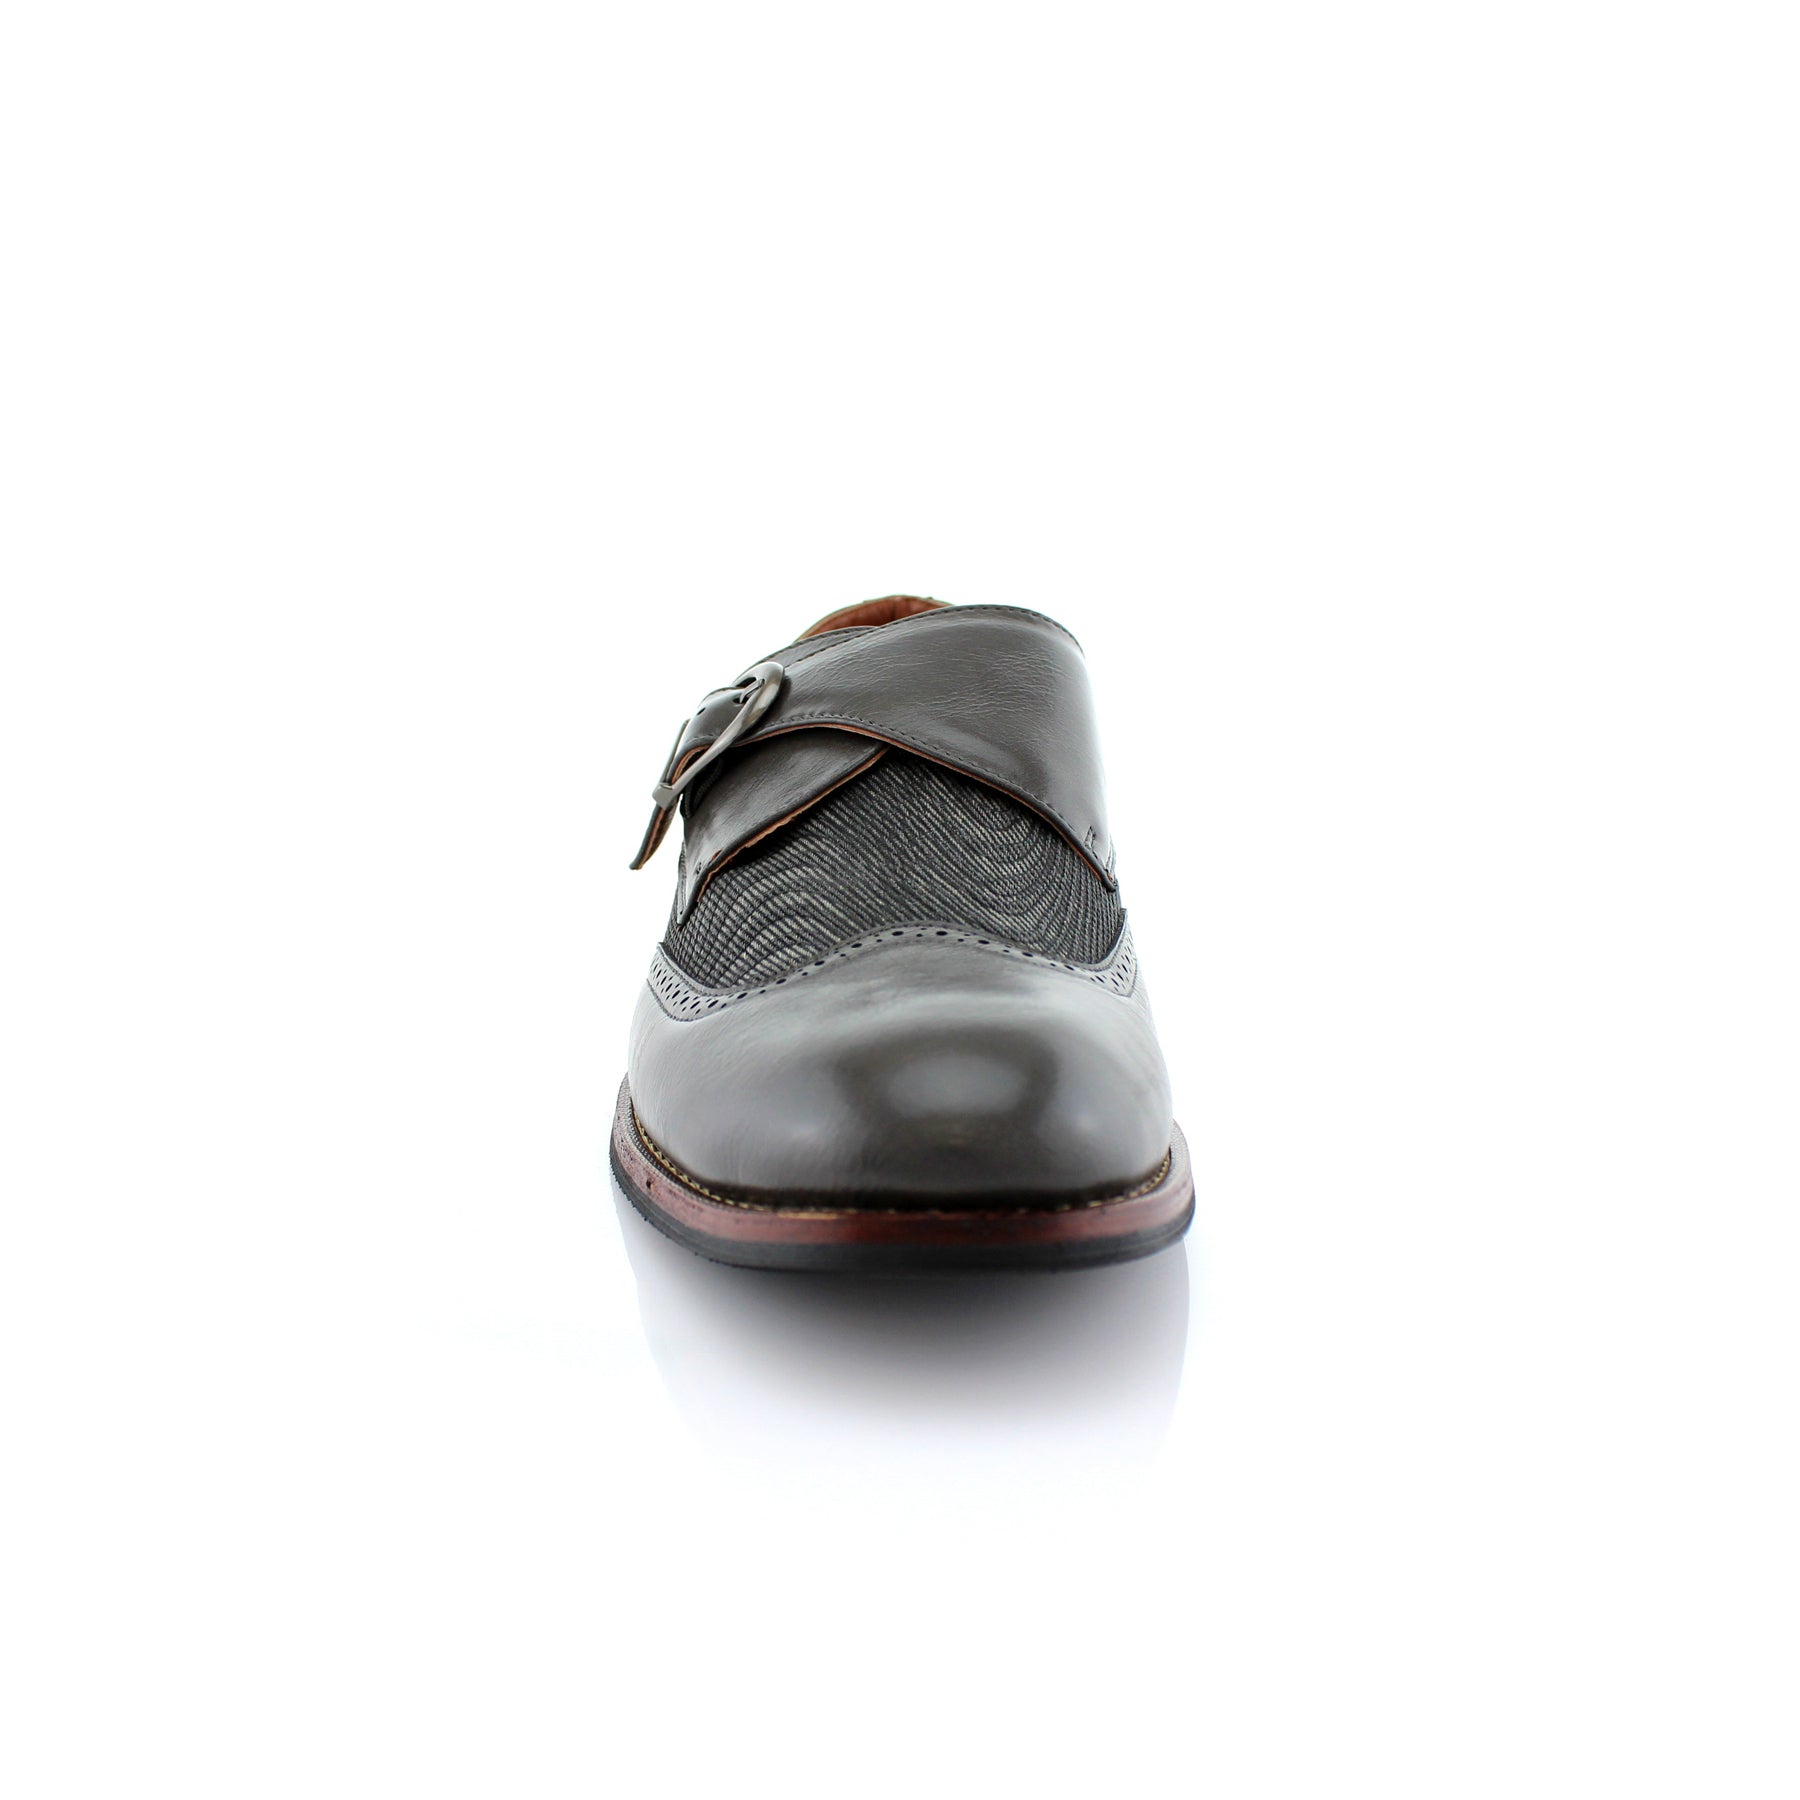 Duo-Textured Single Monk Strap Wingtip Oxfords | Alfred by Ferro Aldo | Conal Footwear | Front Angle View